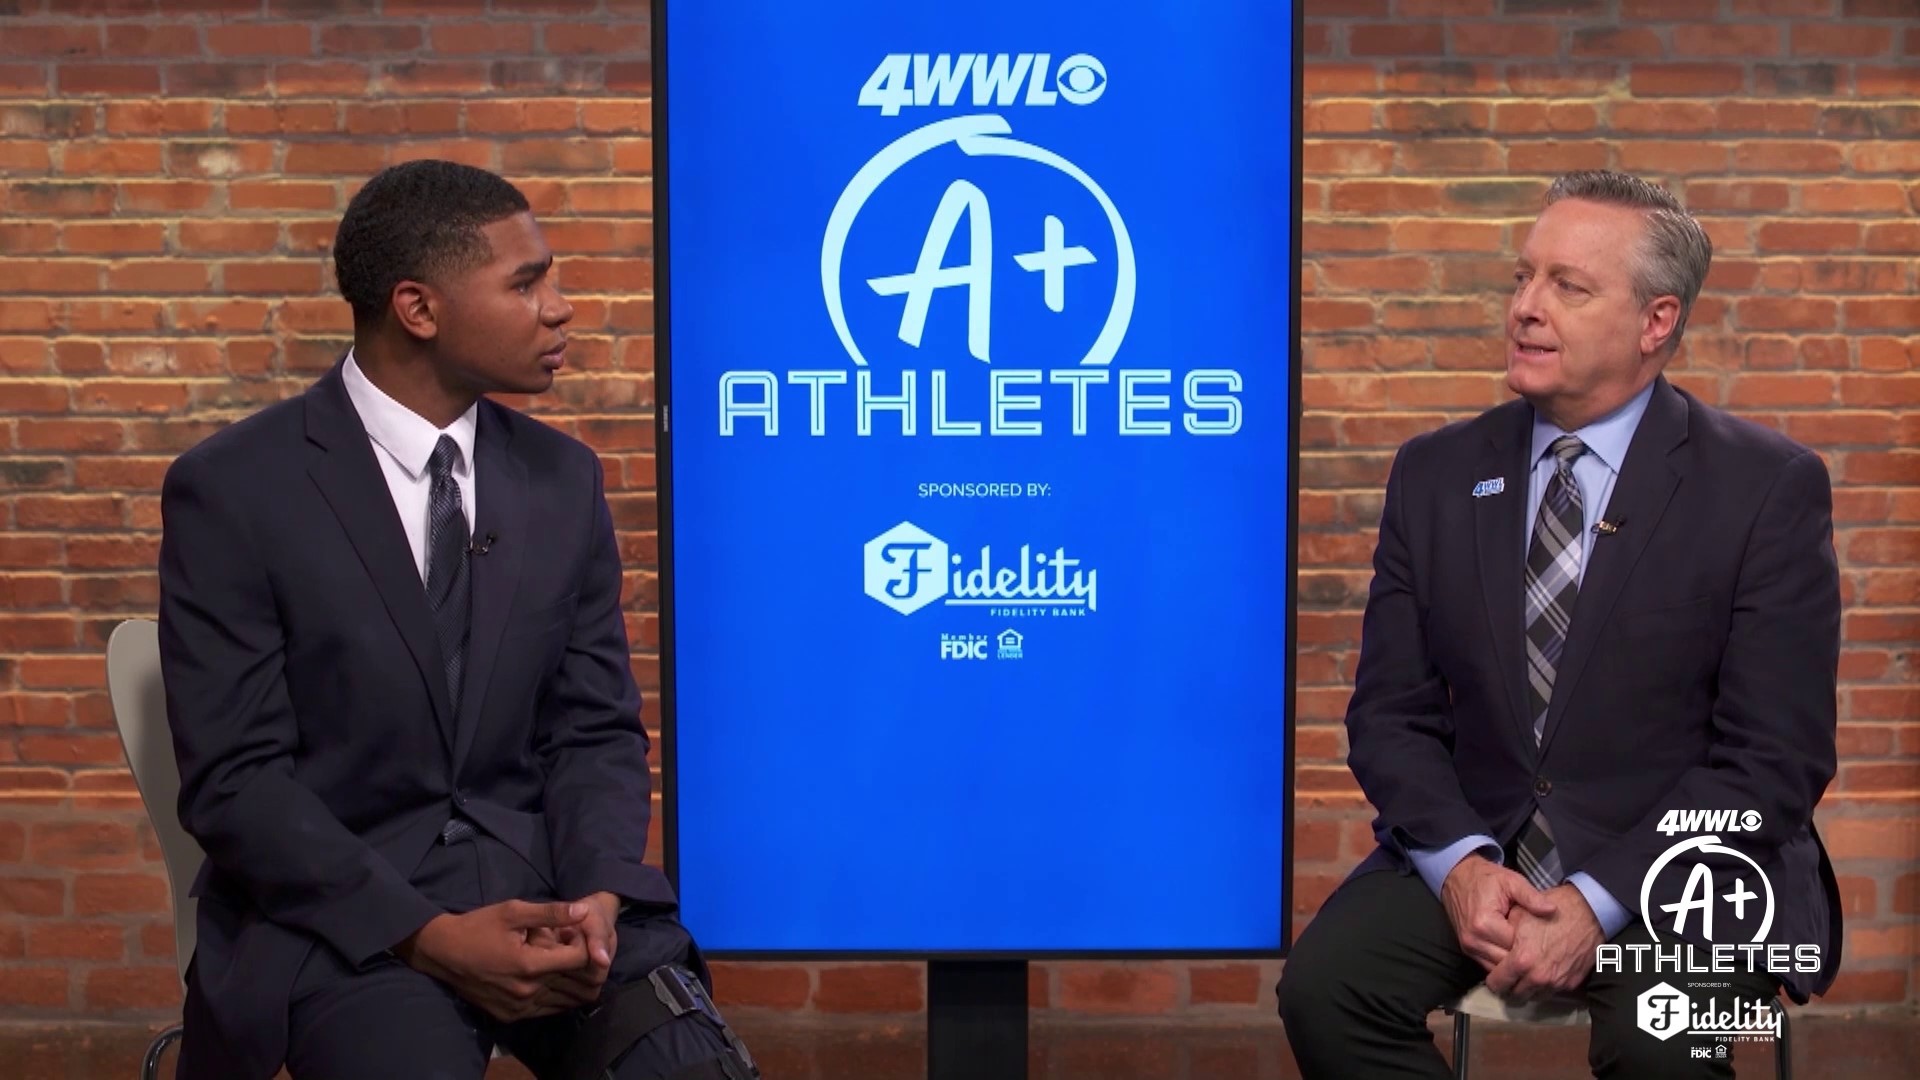 WWL-TV is honoring athletes who excel on and off the field, like Holy Cross High School's Lathan Naquin